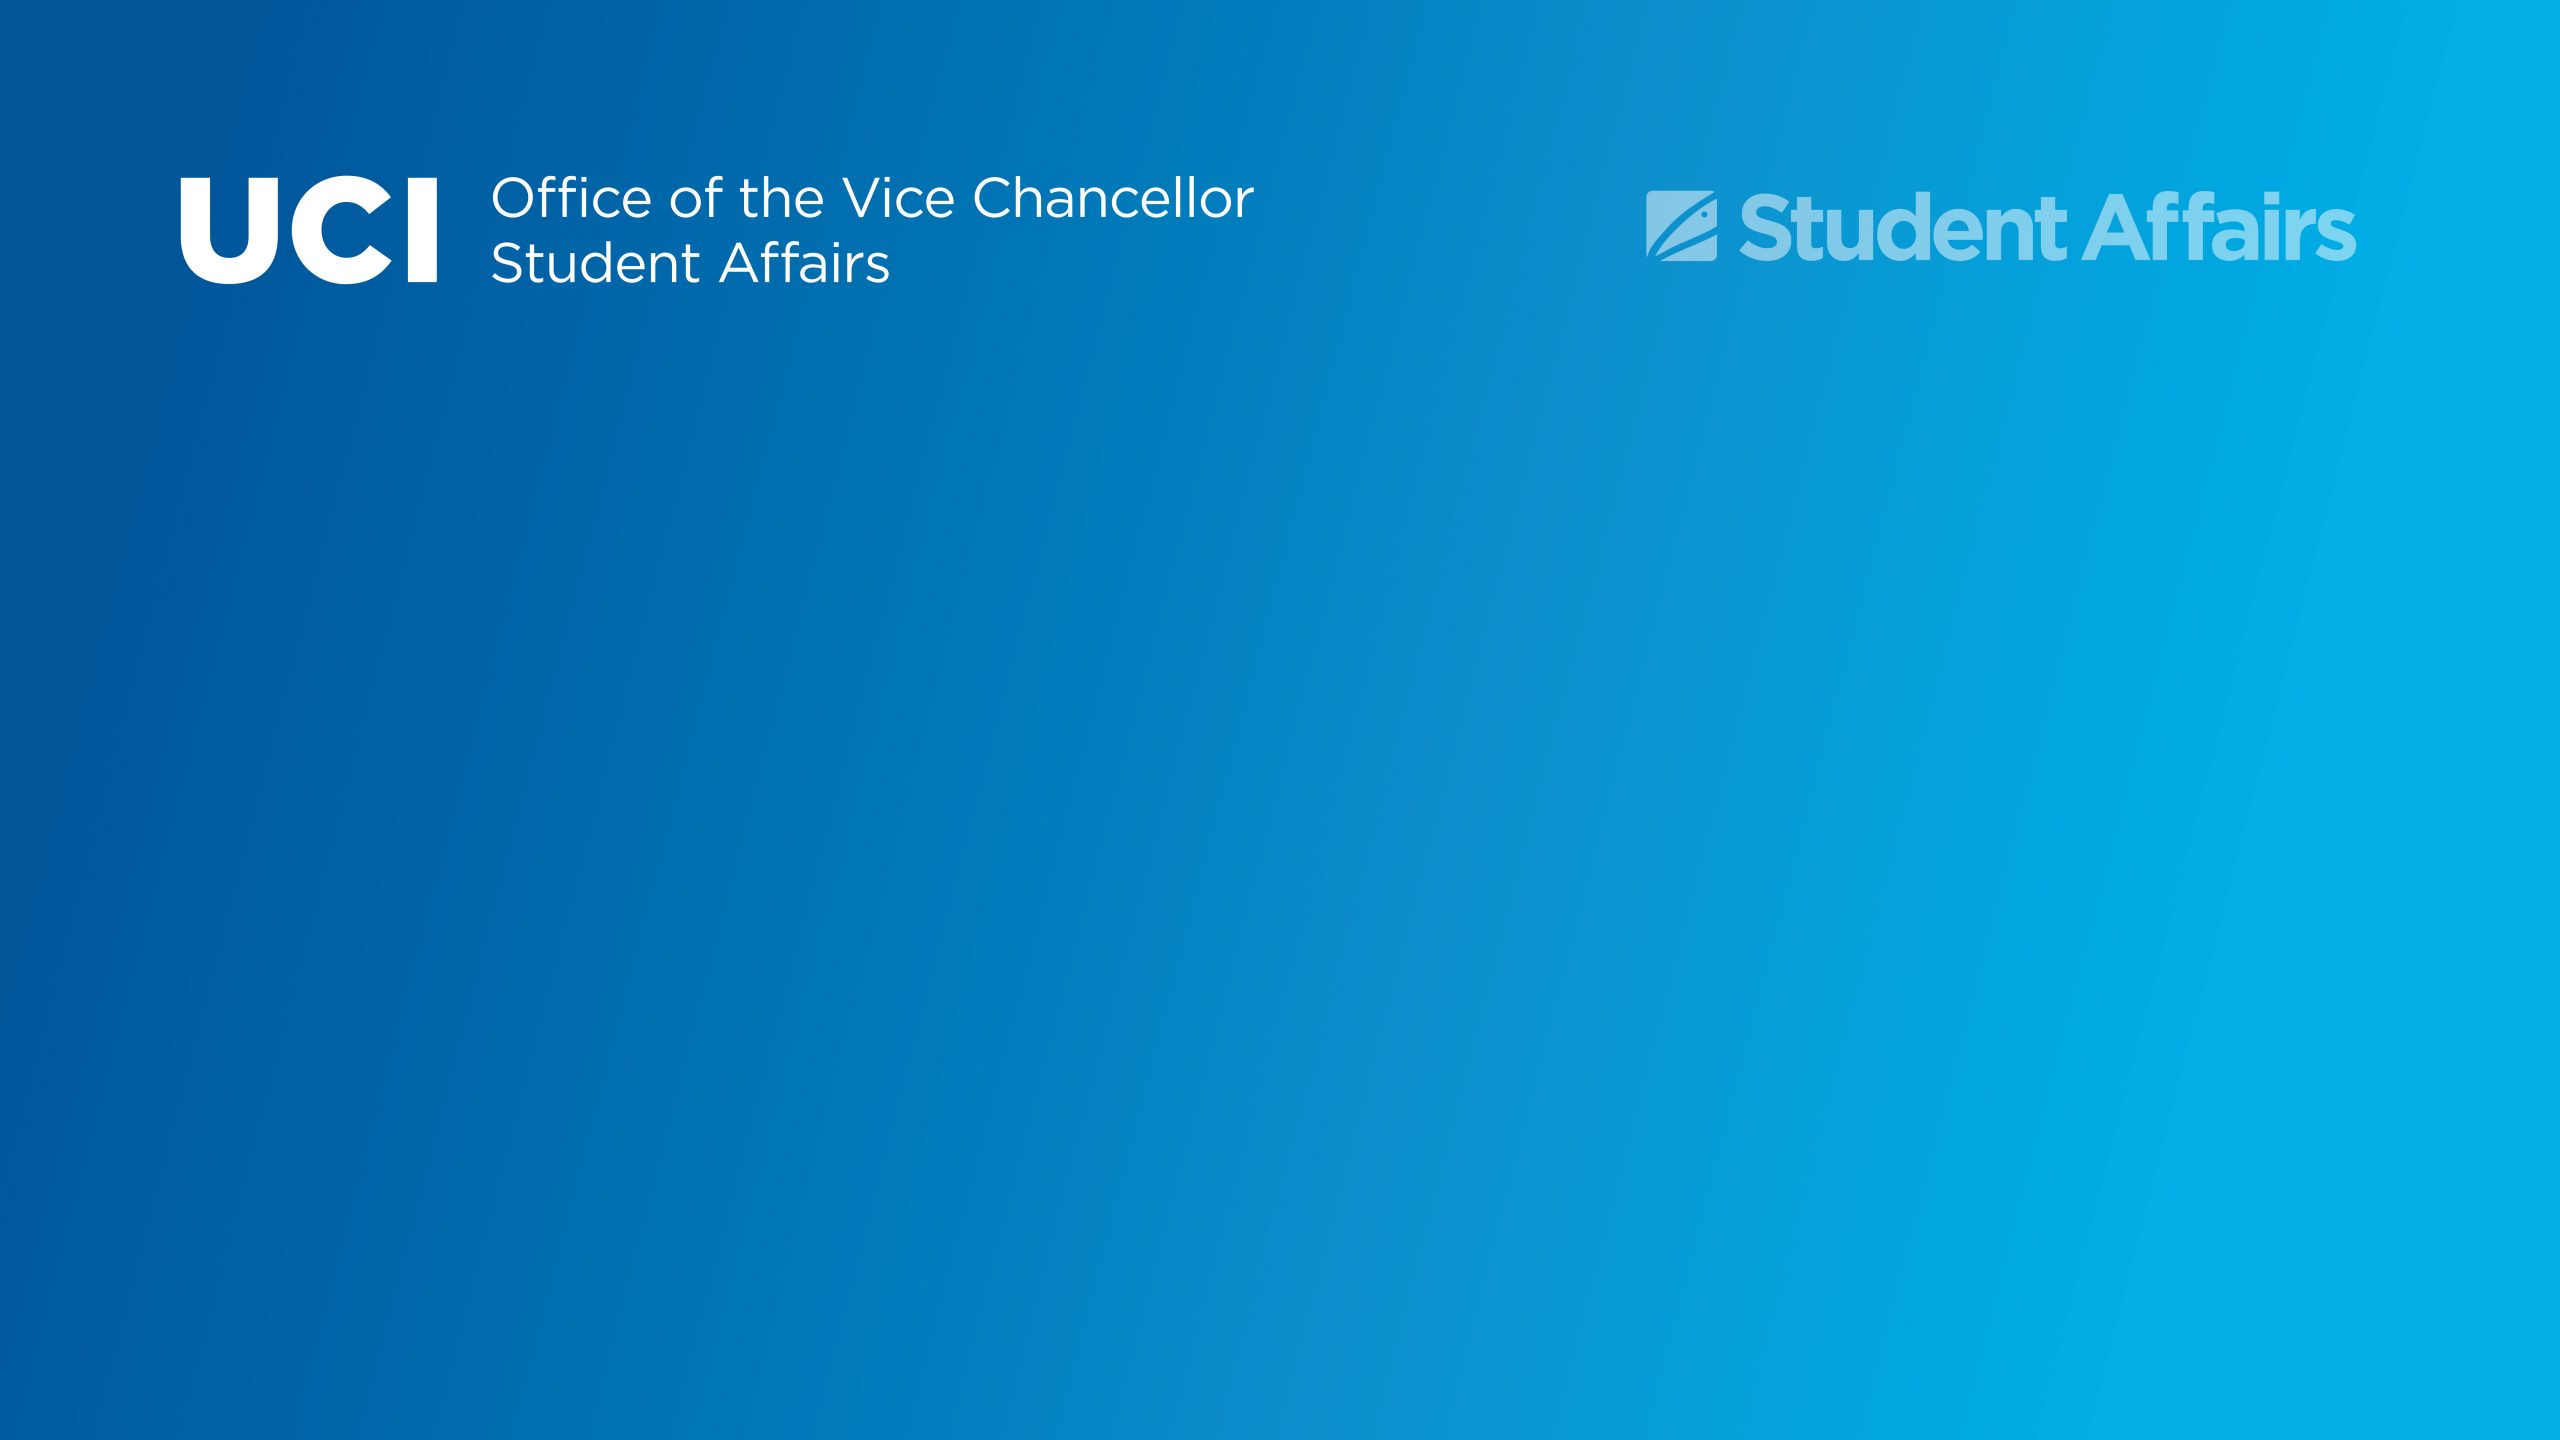 Blue gradient background with transparent white Office of the Vice Chancellor, Student Affairs logo and Student Affairs graphic at top